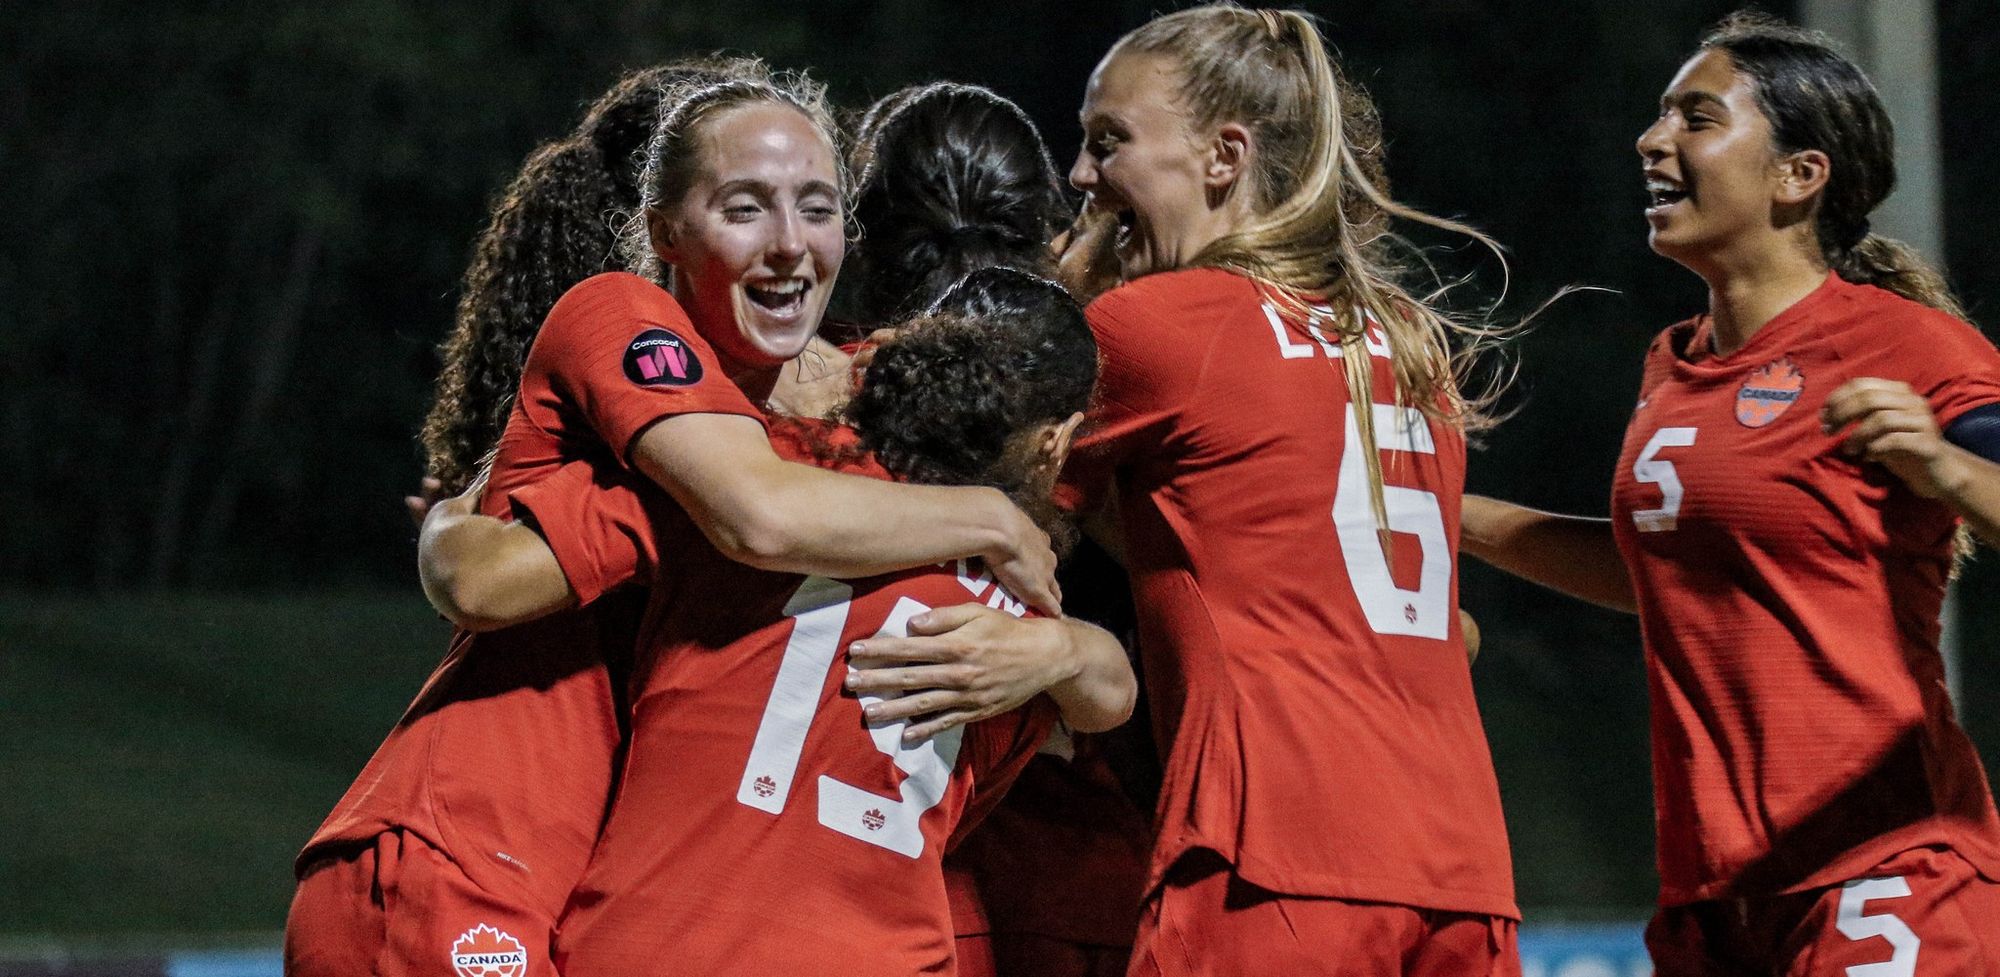 Canada at the FIFA U-17 Women’s World Cup: What you need to know